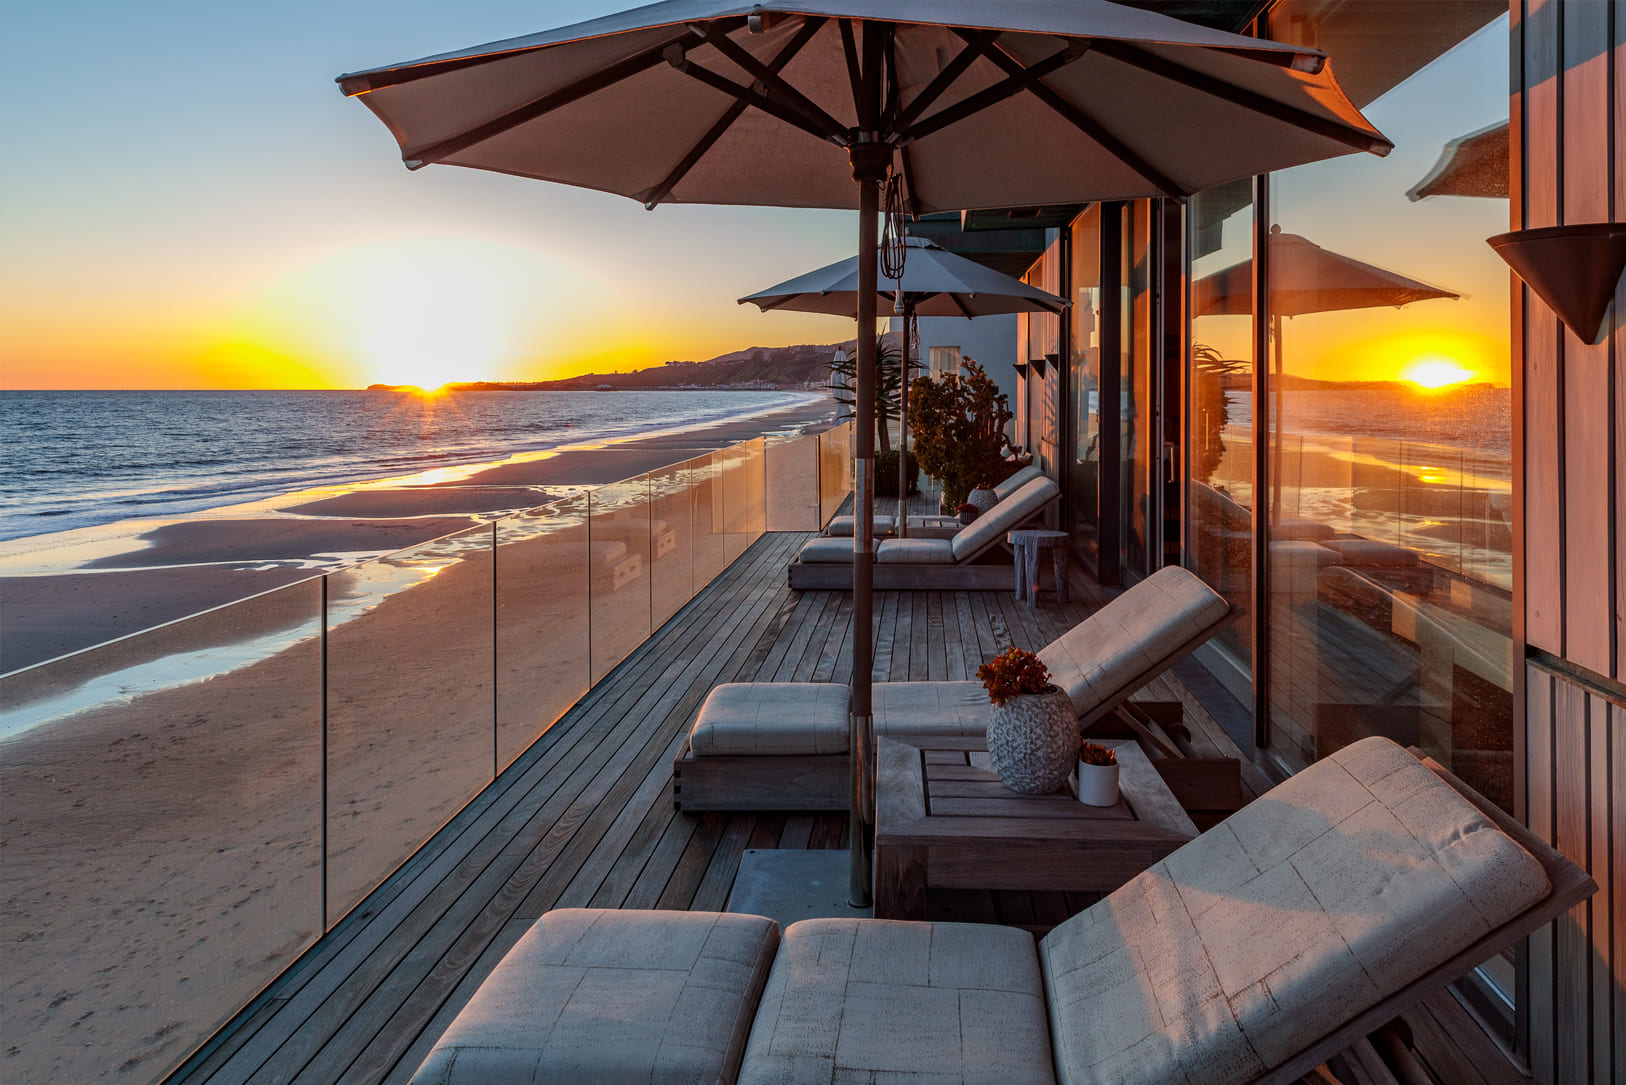 Malibu Beach House beach front terrace with view of pacific ocean and sunset